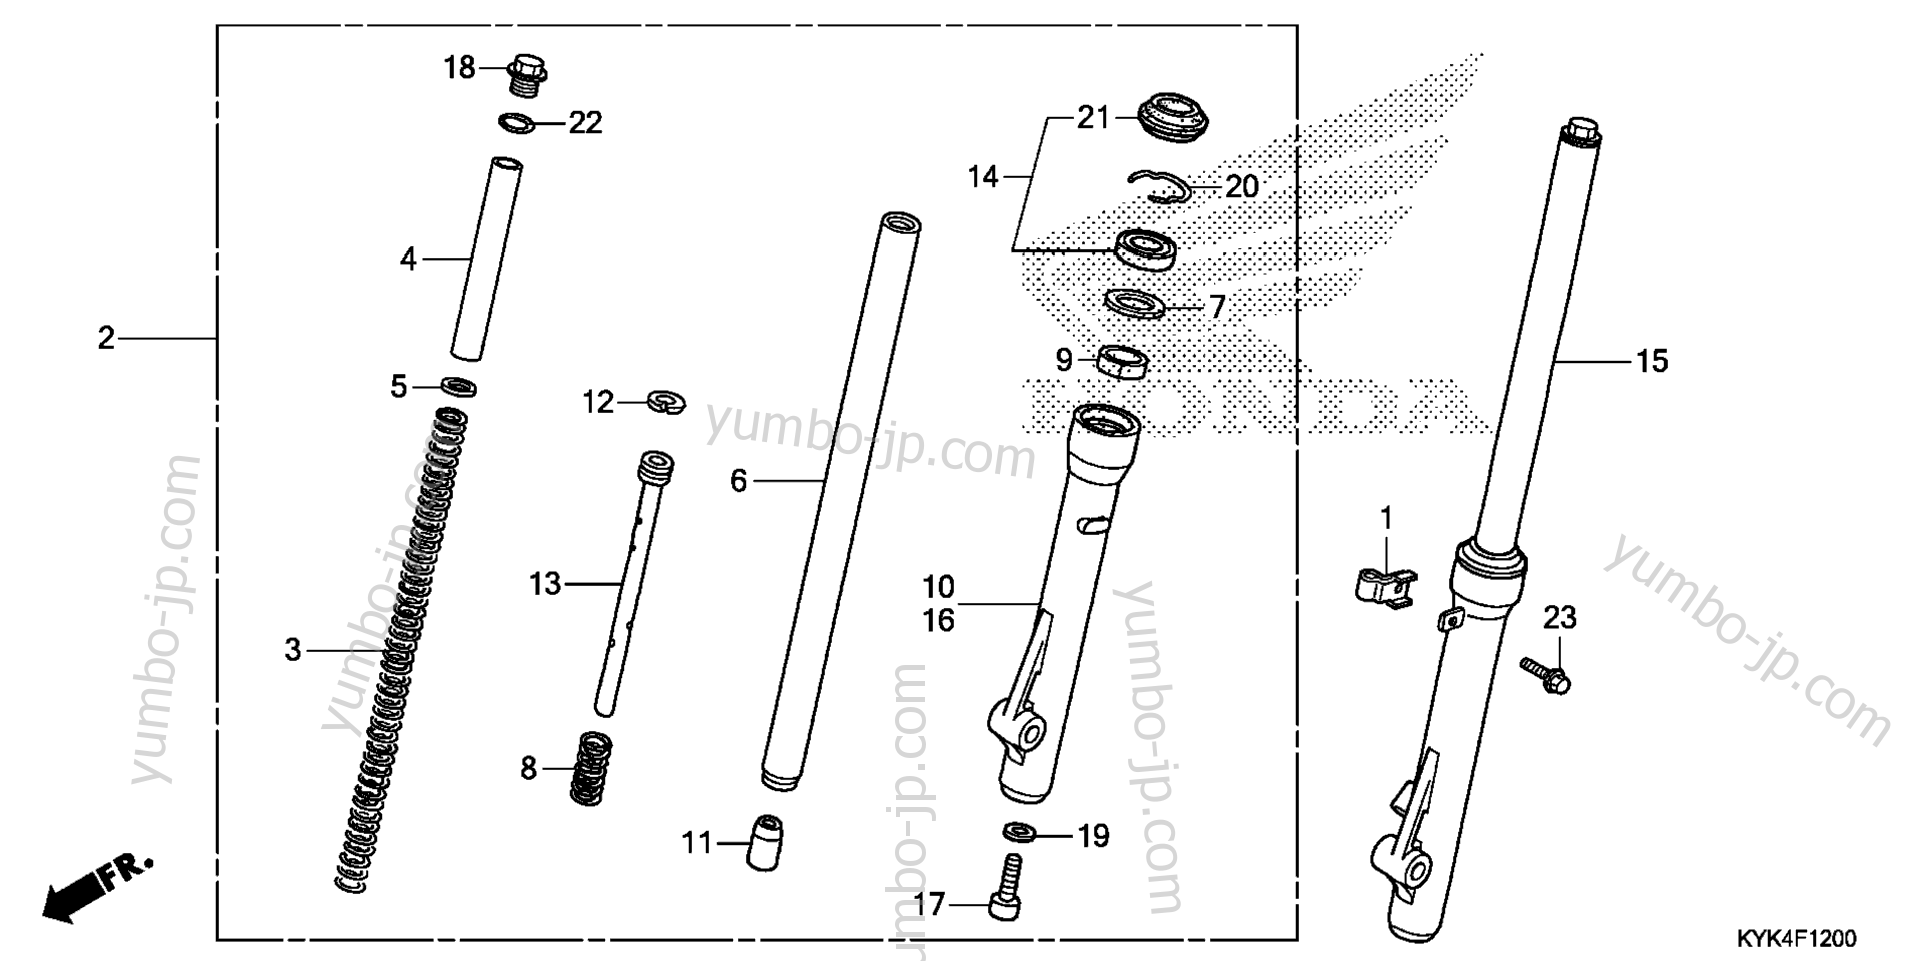 FRONT FORK for motorcycles HONDA CRF110F AC 2014 year